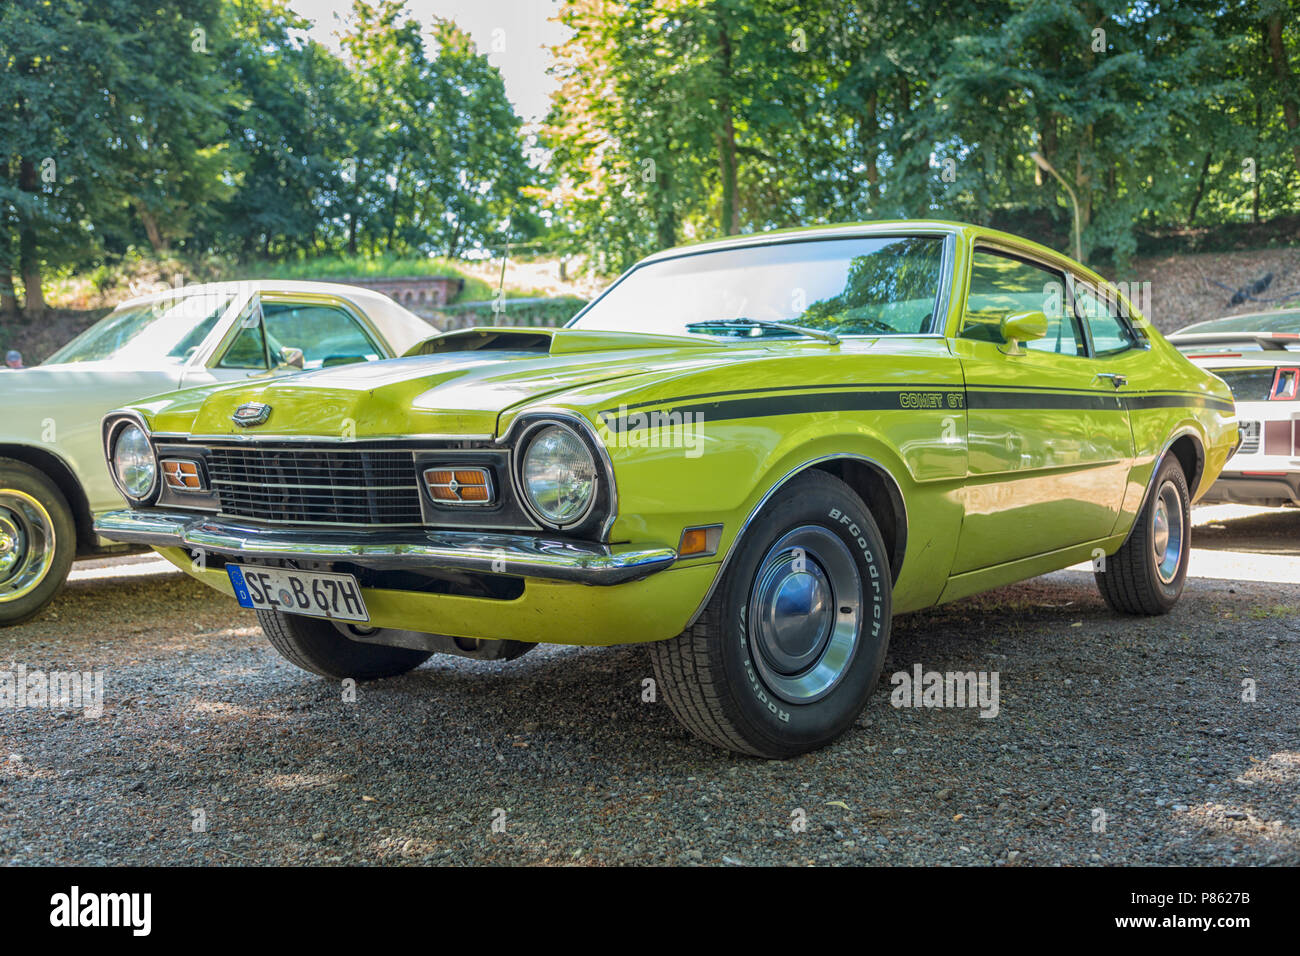 Stade, Germany - July 8, 2018: A vintage 16971 Mercury Comet GT at 5th Summertime Drive US car meeting. Stock Photo